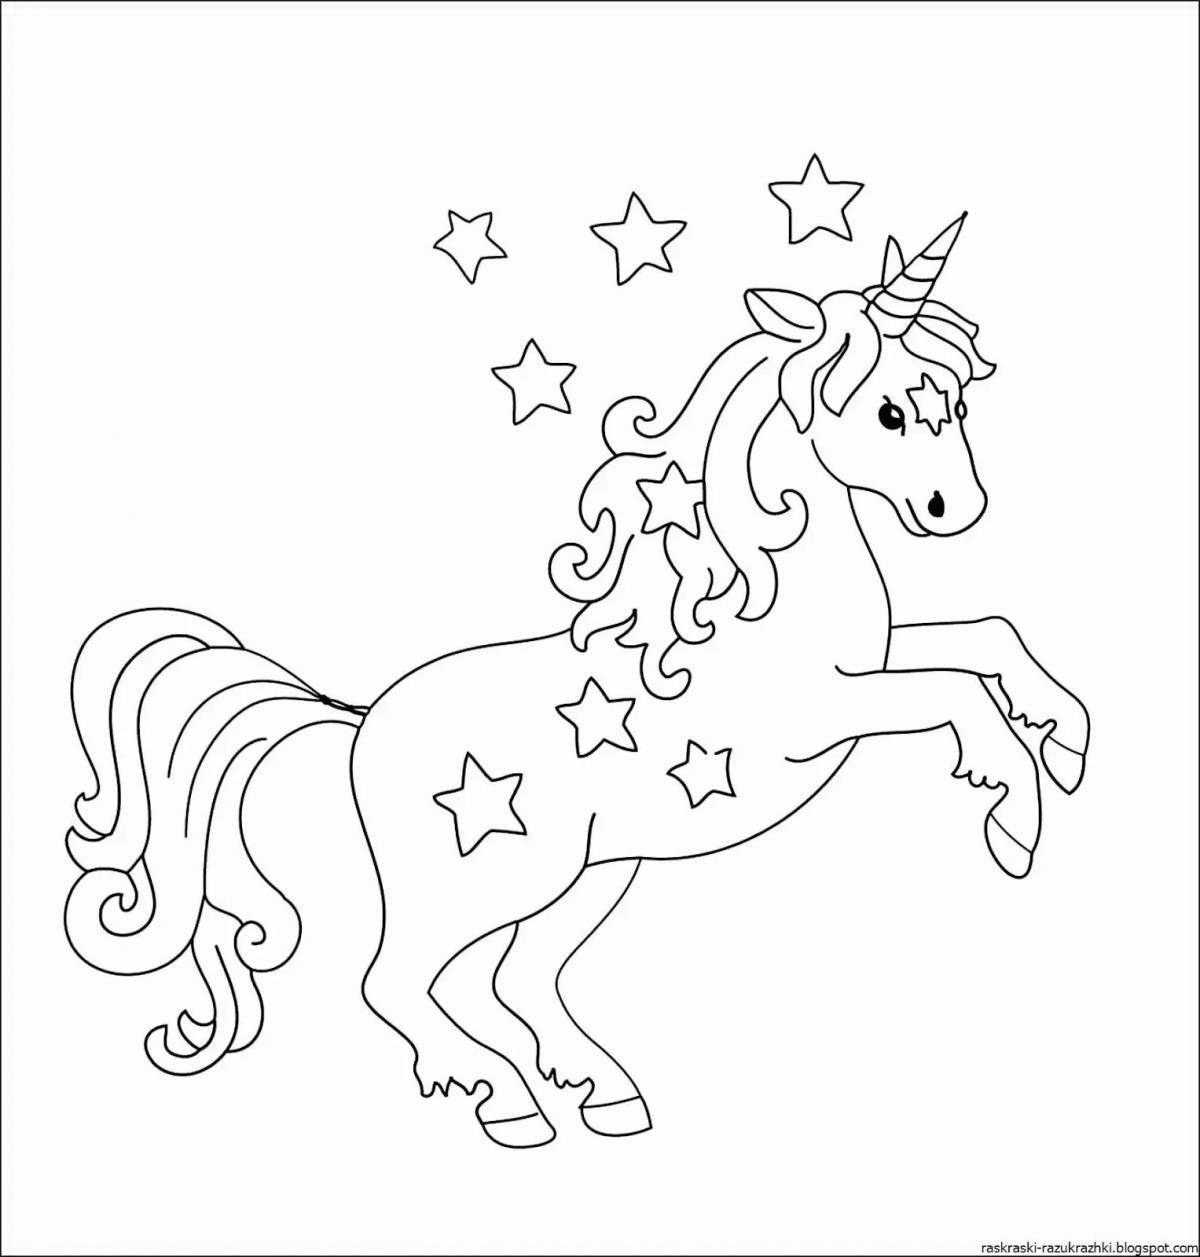 Perfect coloring how to draw a unicorn